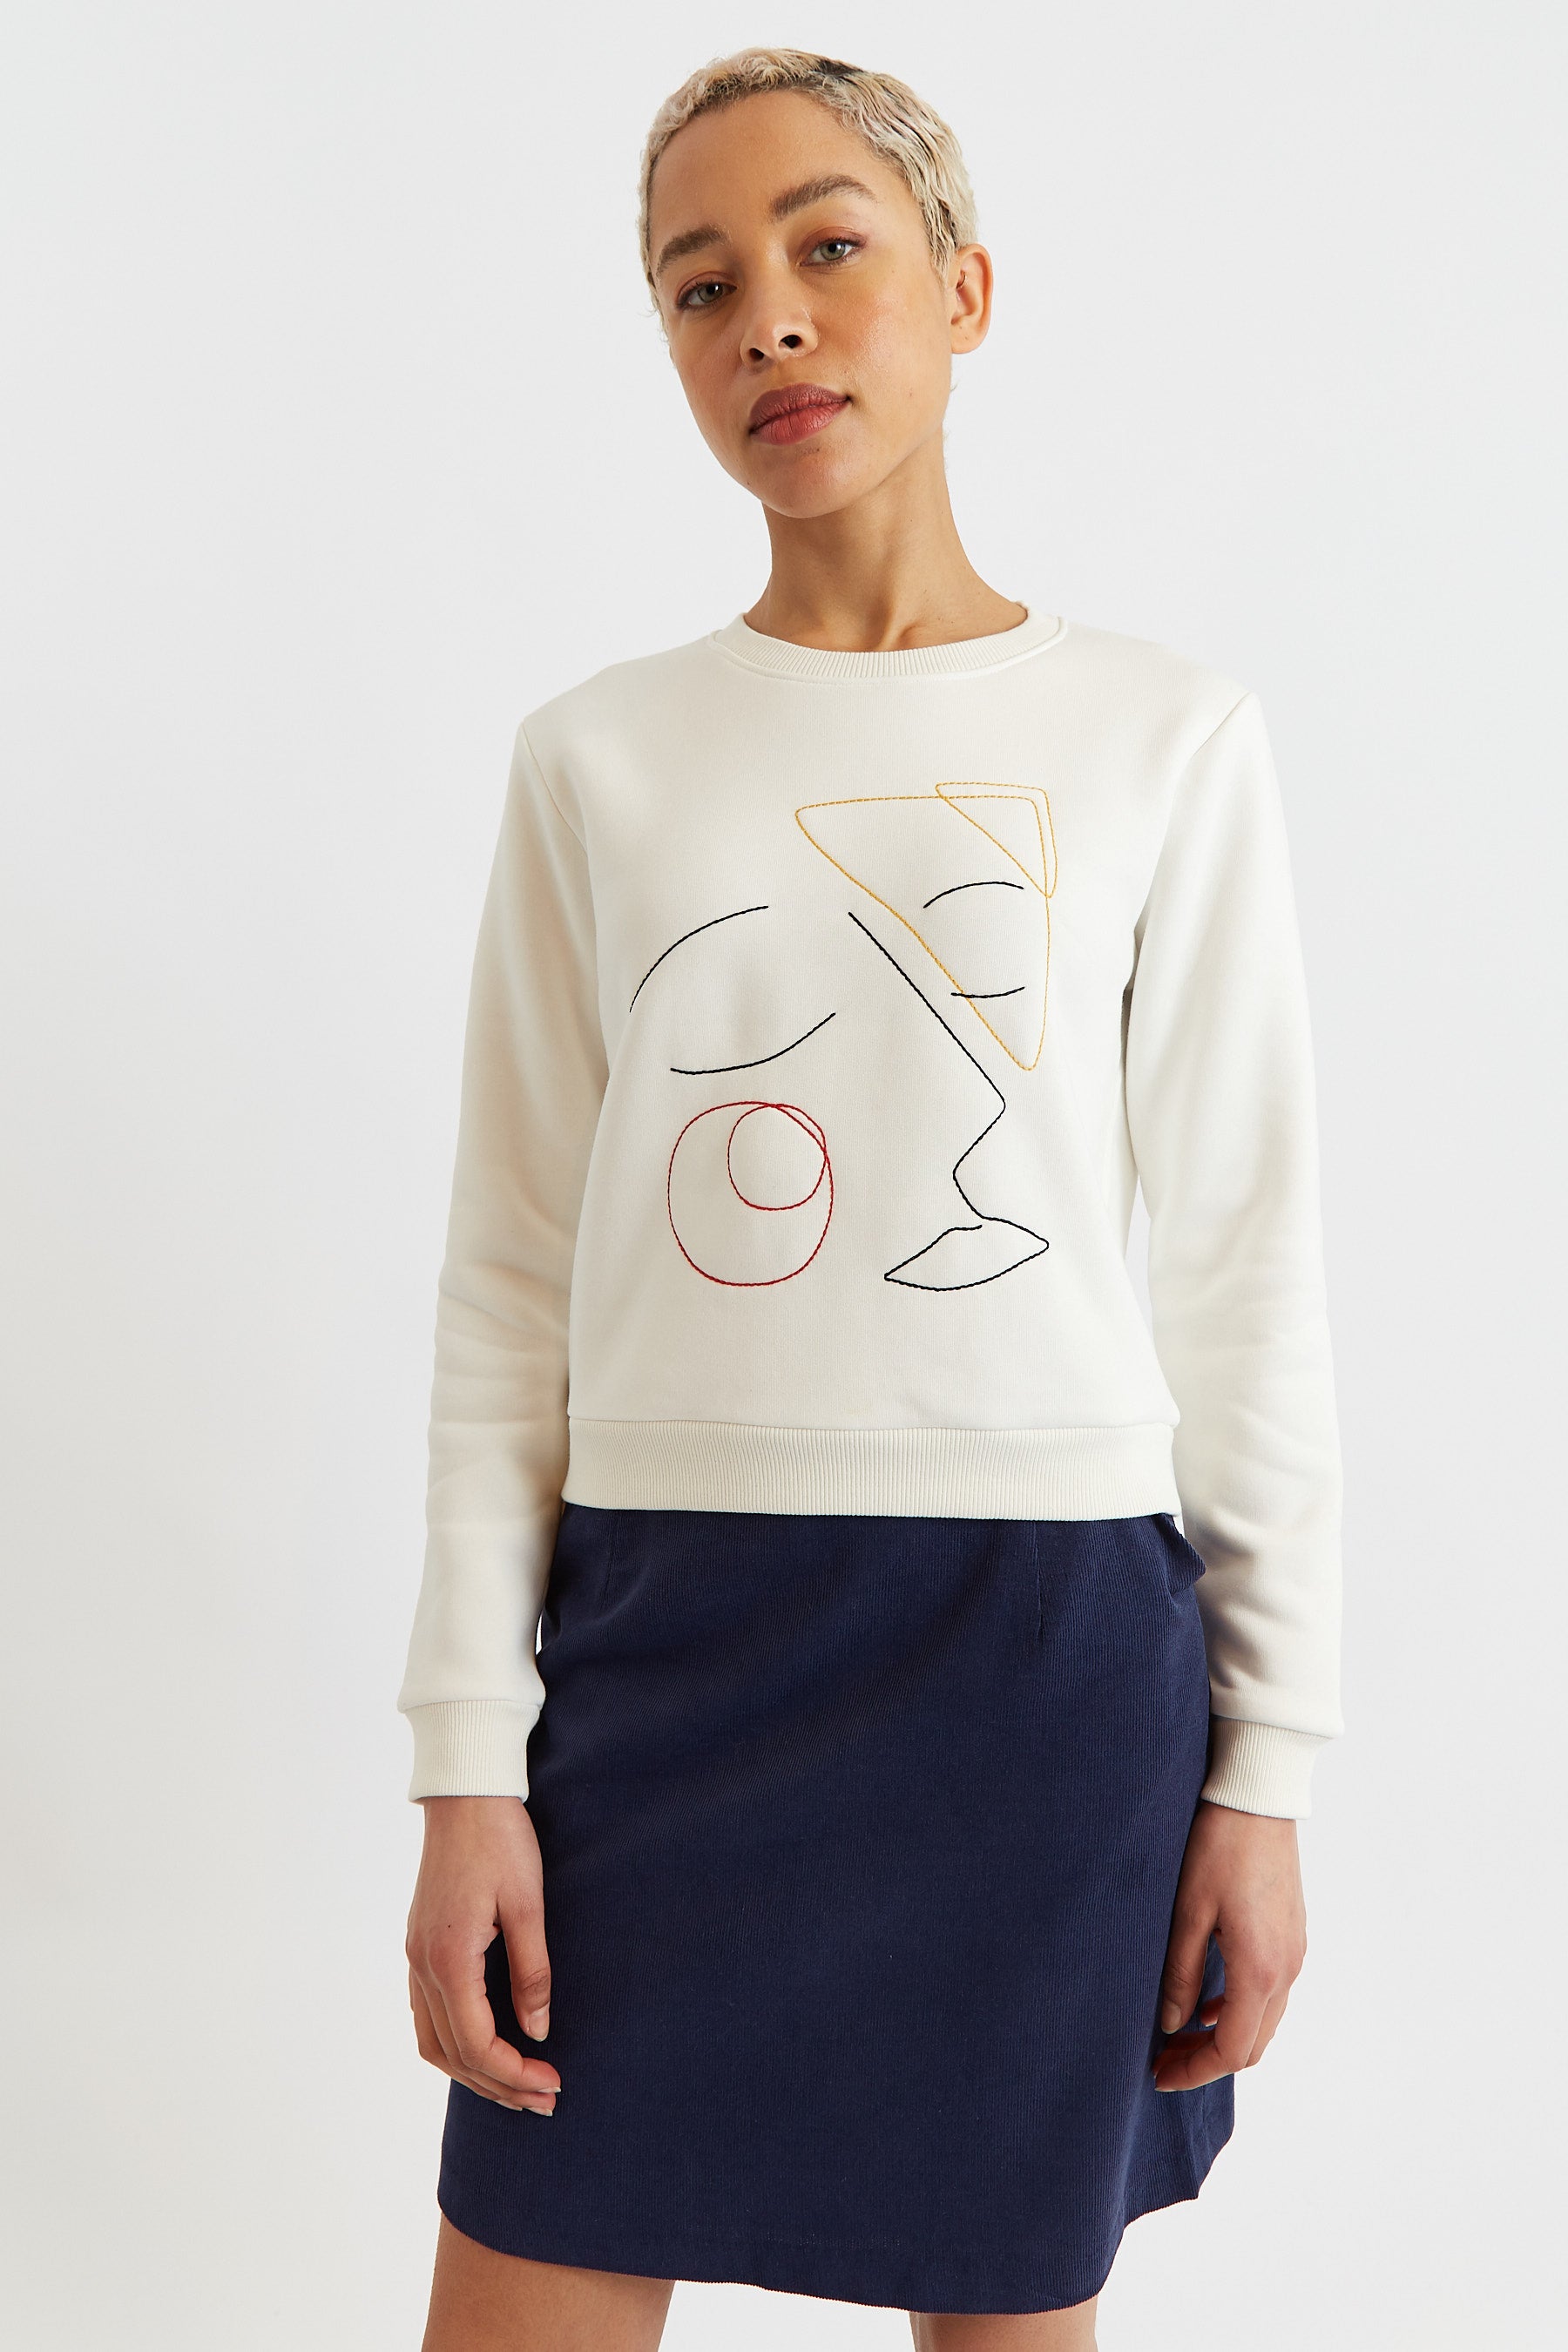 - Louche Facetime Embroidered Jan White Sweatshirt Off –